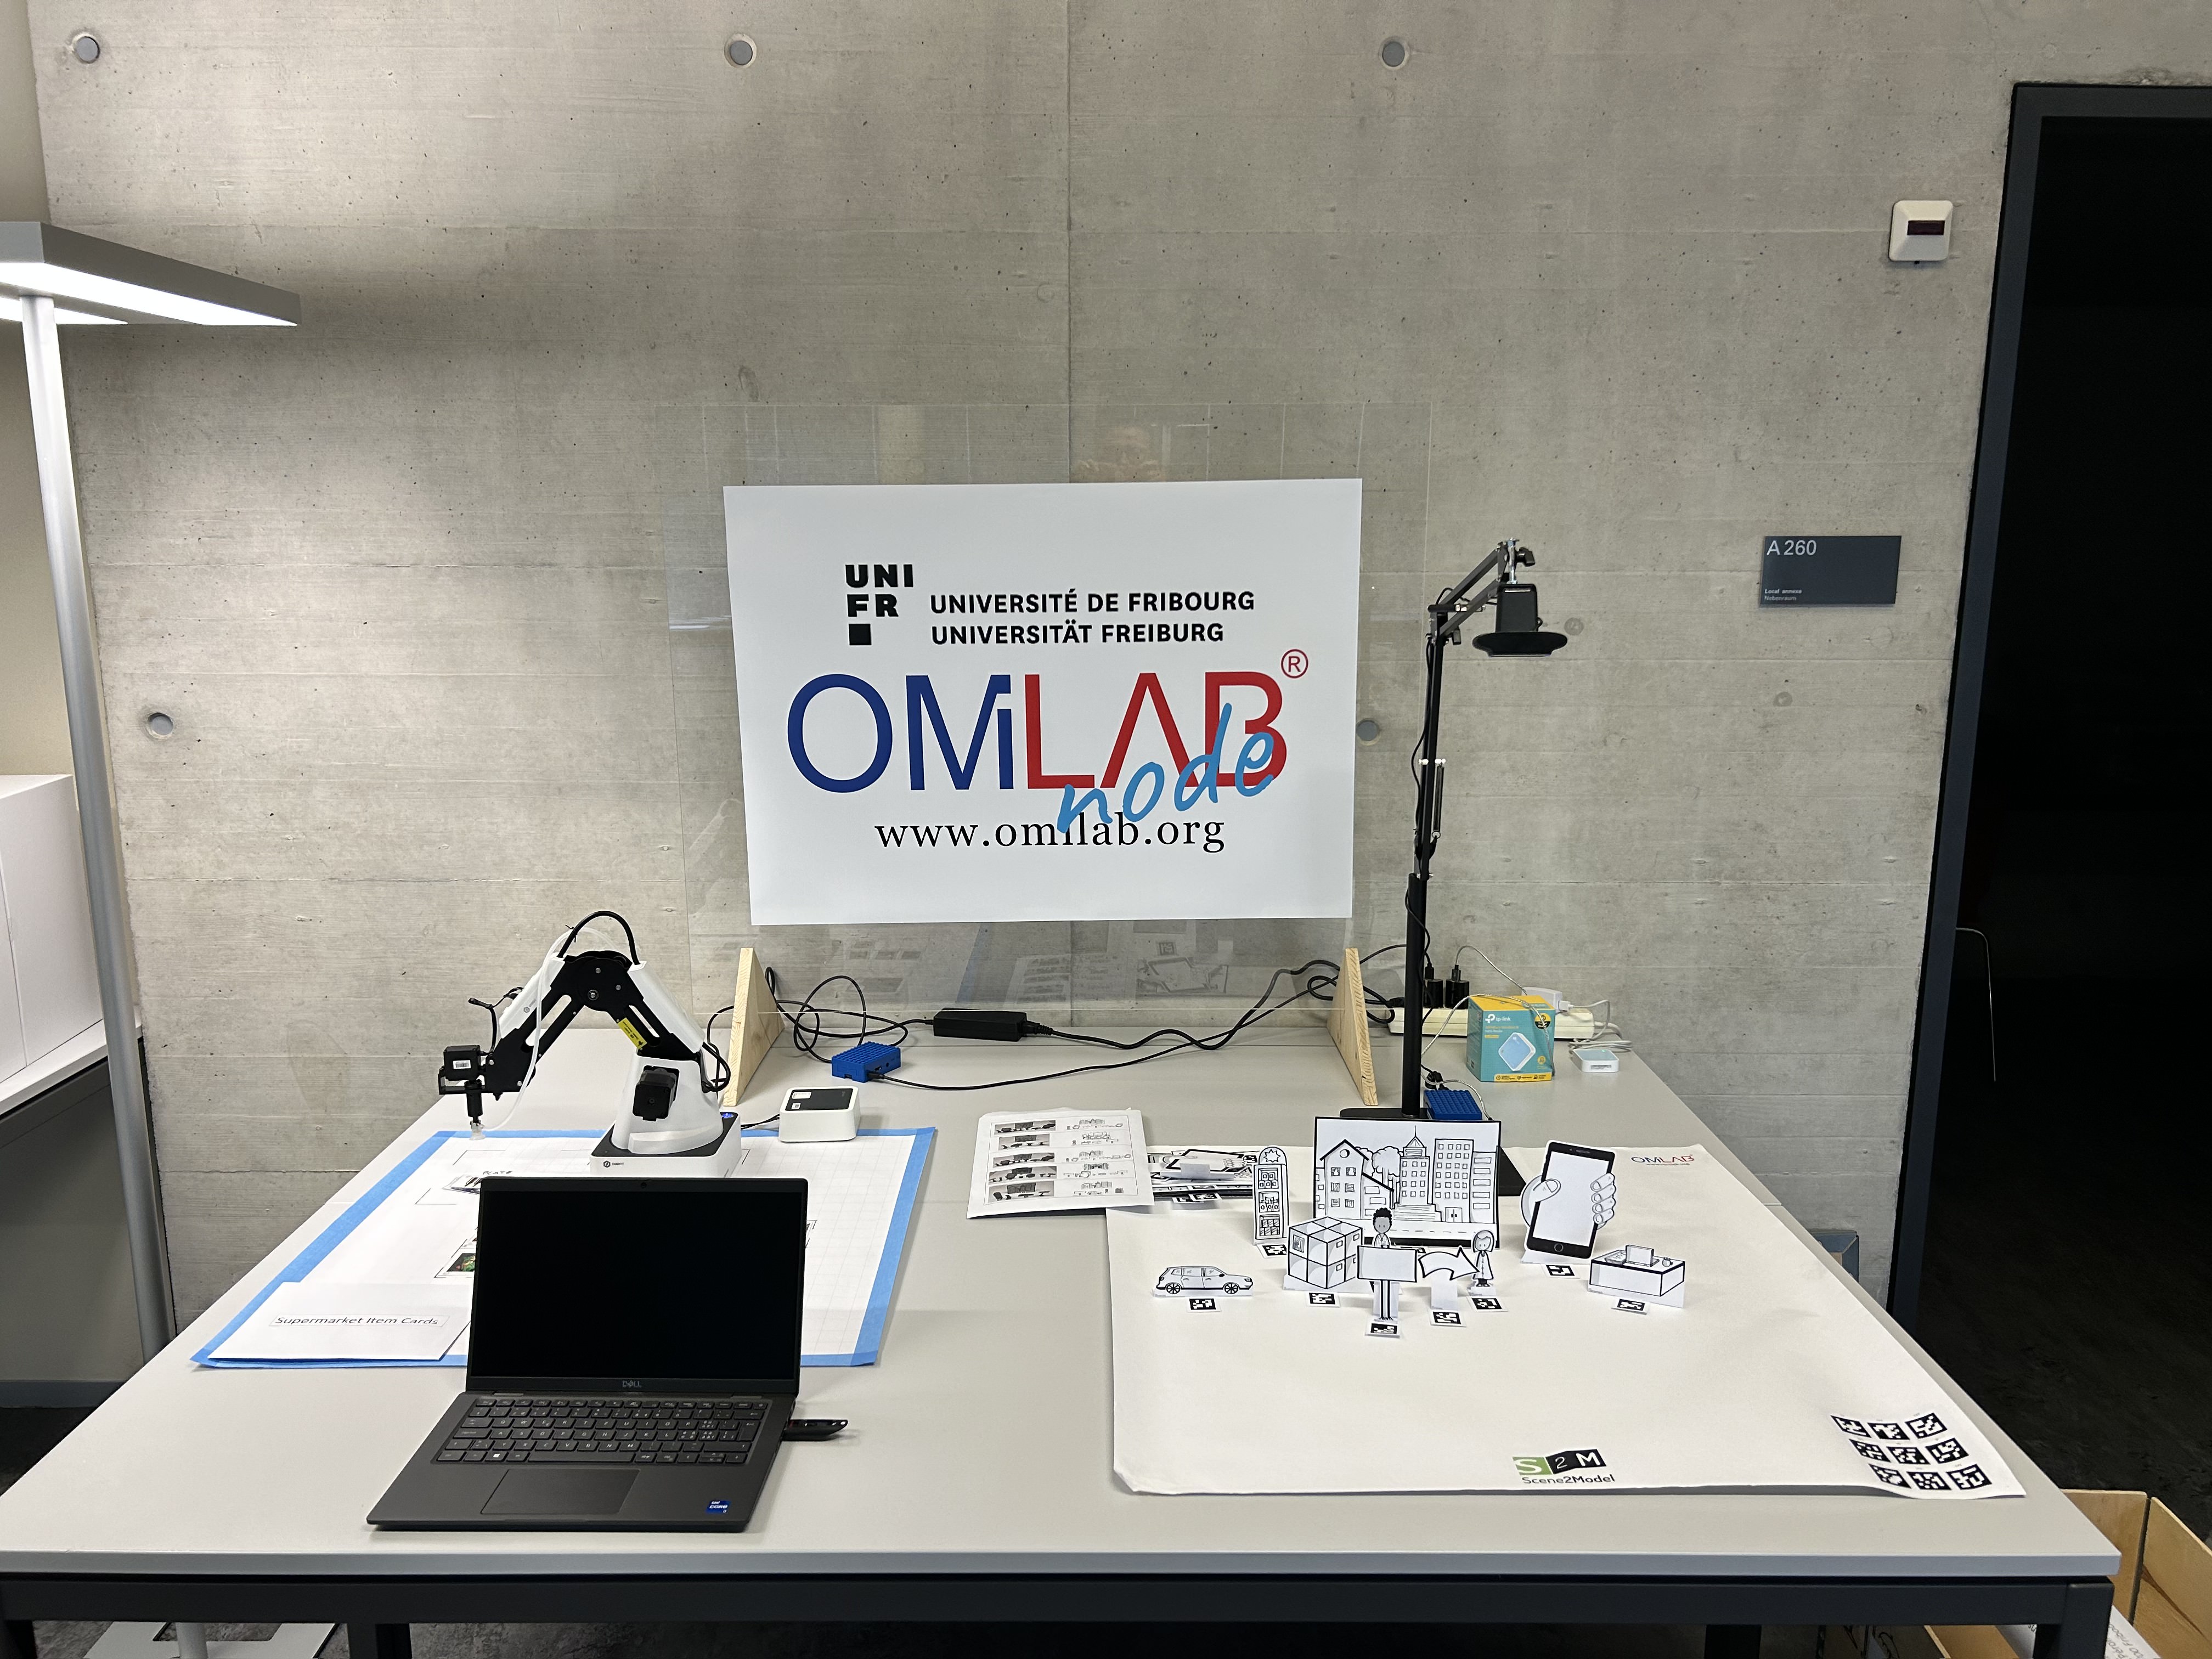 OMILAB@University of Fribourg